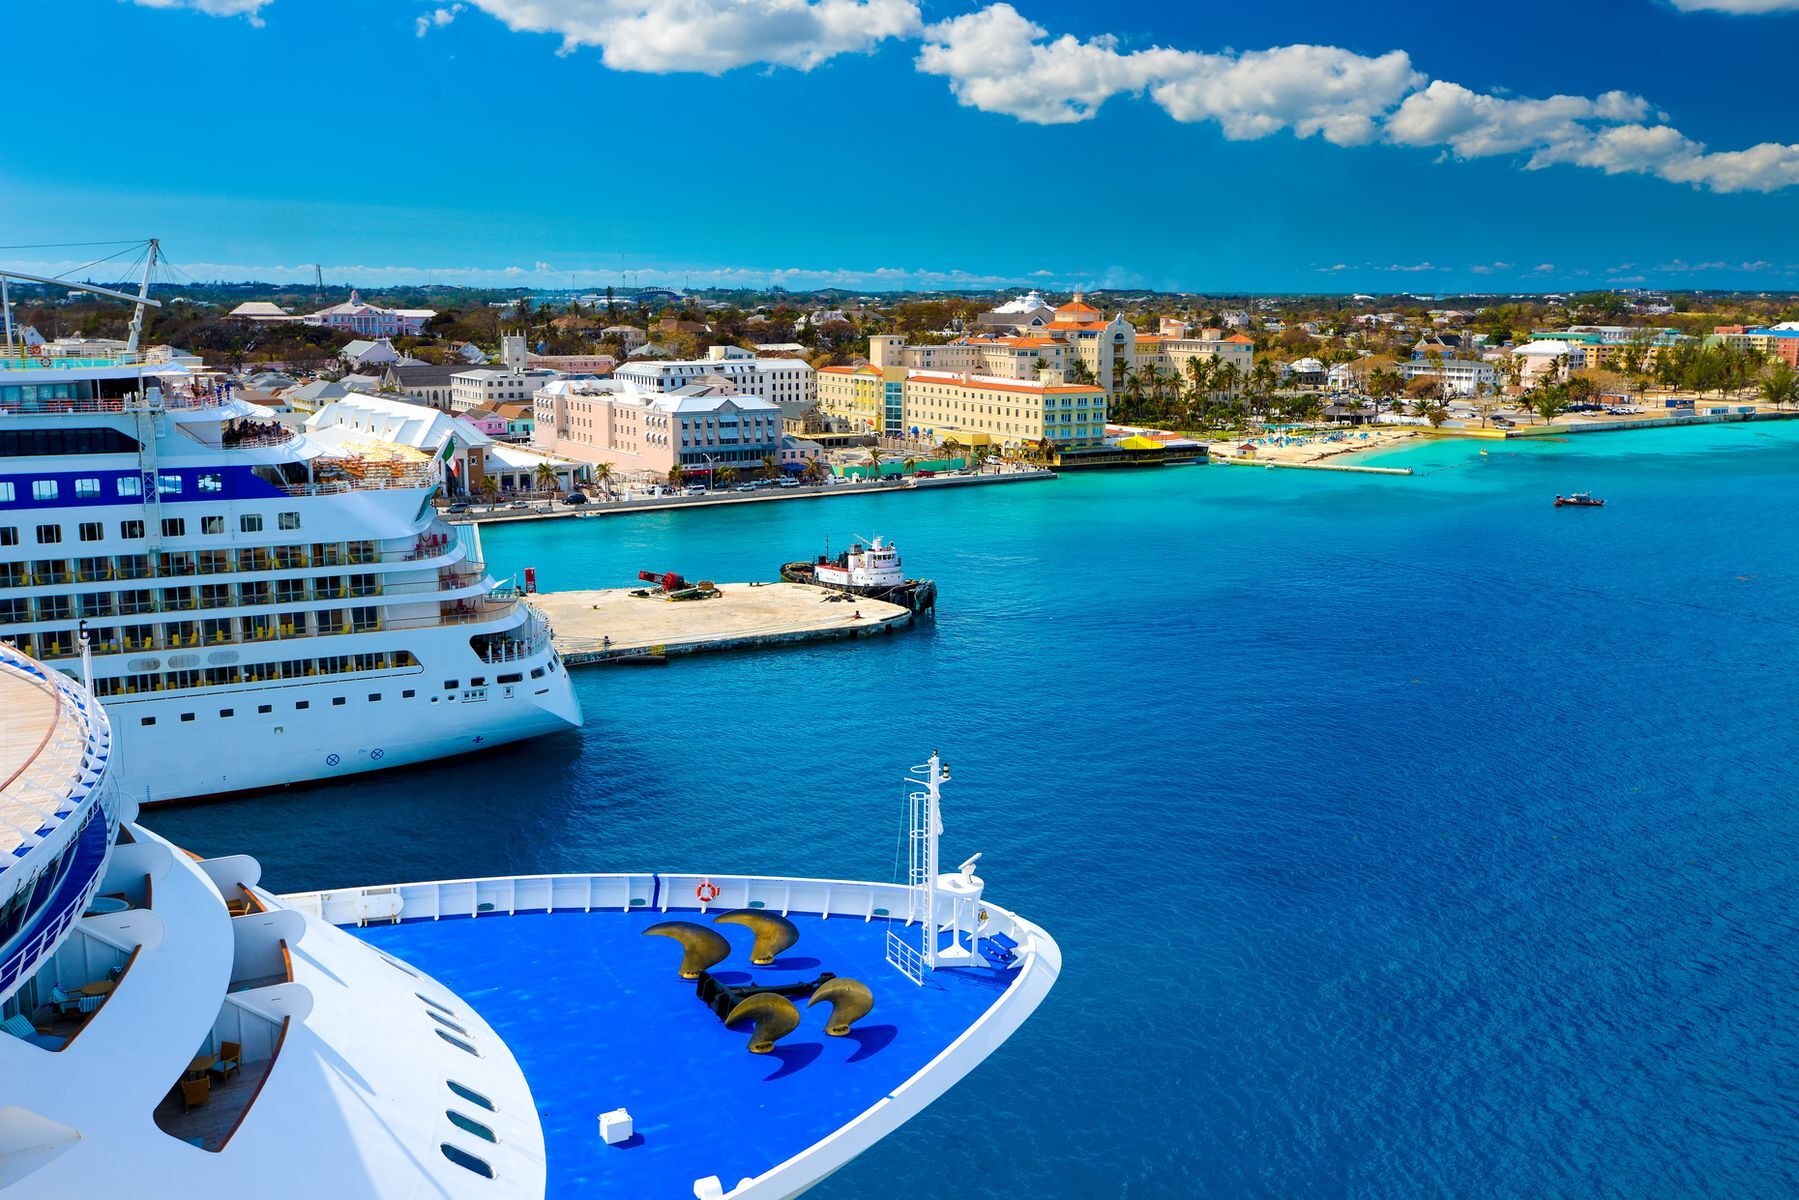 <p>Boasting beautiful beaches and a bustling and vibrant nightlife, <a href="https://www.thetravel.com/travel-guide-to-nassau-bahamas/">Nassau</a>, the capital city of the Bahamas, sounds like it has it all. However, due to its popularity, the city is also known for its overcrowding, high prices, and pushy vendors. It is also the most visited port for <a href="https://www.iqcruising.com/ports/caribbean/bahamas/nassau/index.html#:~:text=Nassau%20is%20the%20most%20visited,destinations%20in%20the%20Caribbean%20itineraries.">cruise ships</a> in the Bahamas, leading to an influx of tourists. The city is unfortunately also facing <a href="https://www.smartraveller.gov.au/destinations/americas/bahamas#:~:text=Armed%20robberies%2C%20burglaries%2C%20purse%20snatchings,)%2C%20where%20gang%20violence%20occurs.">high rates of crime</a>, meaning this destination is one to skip in 2024. </p>